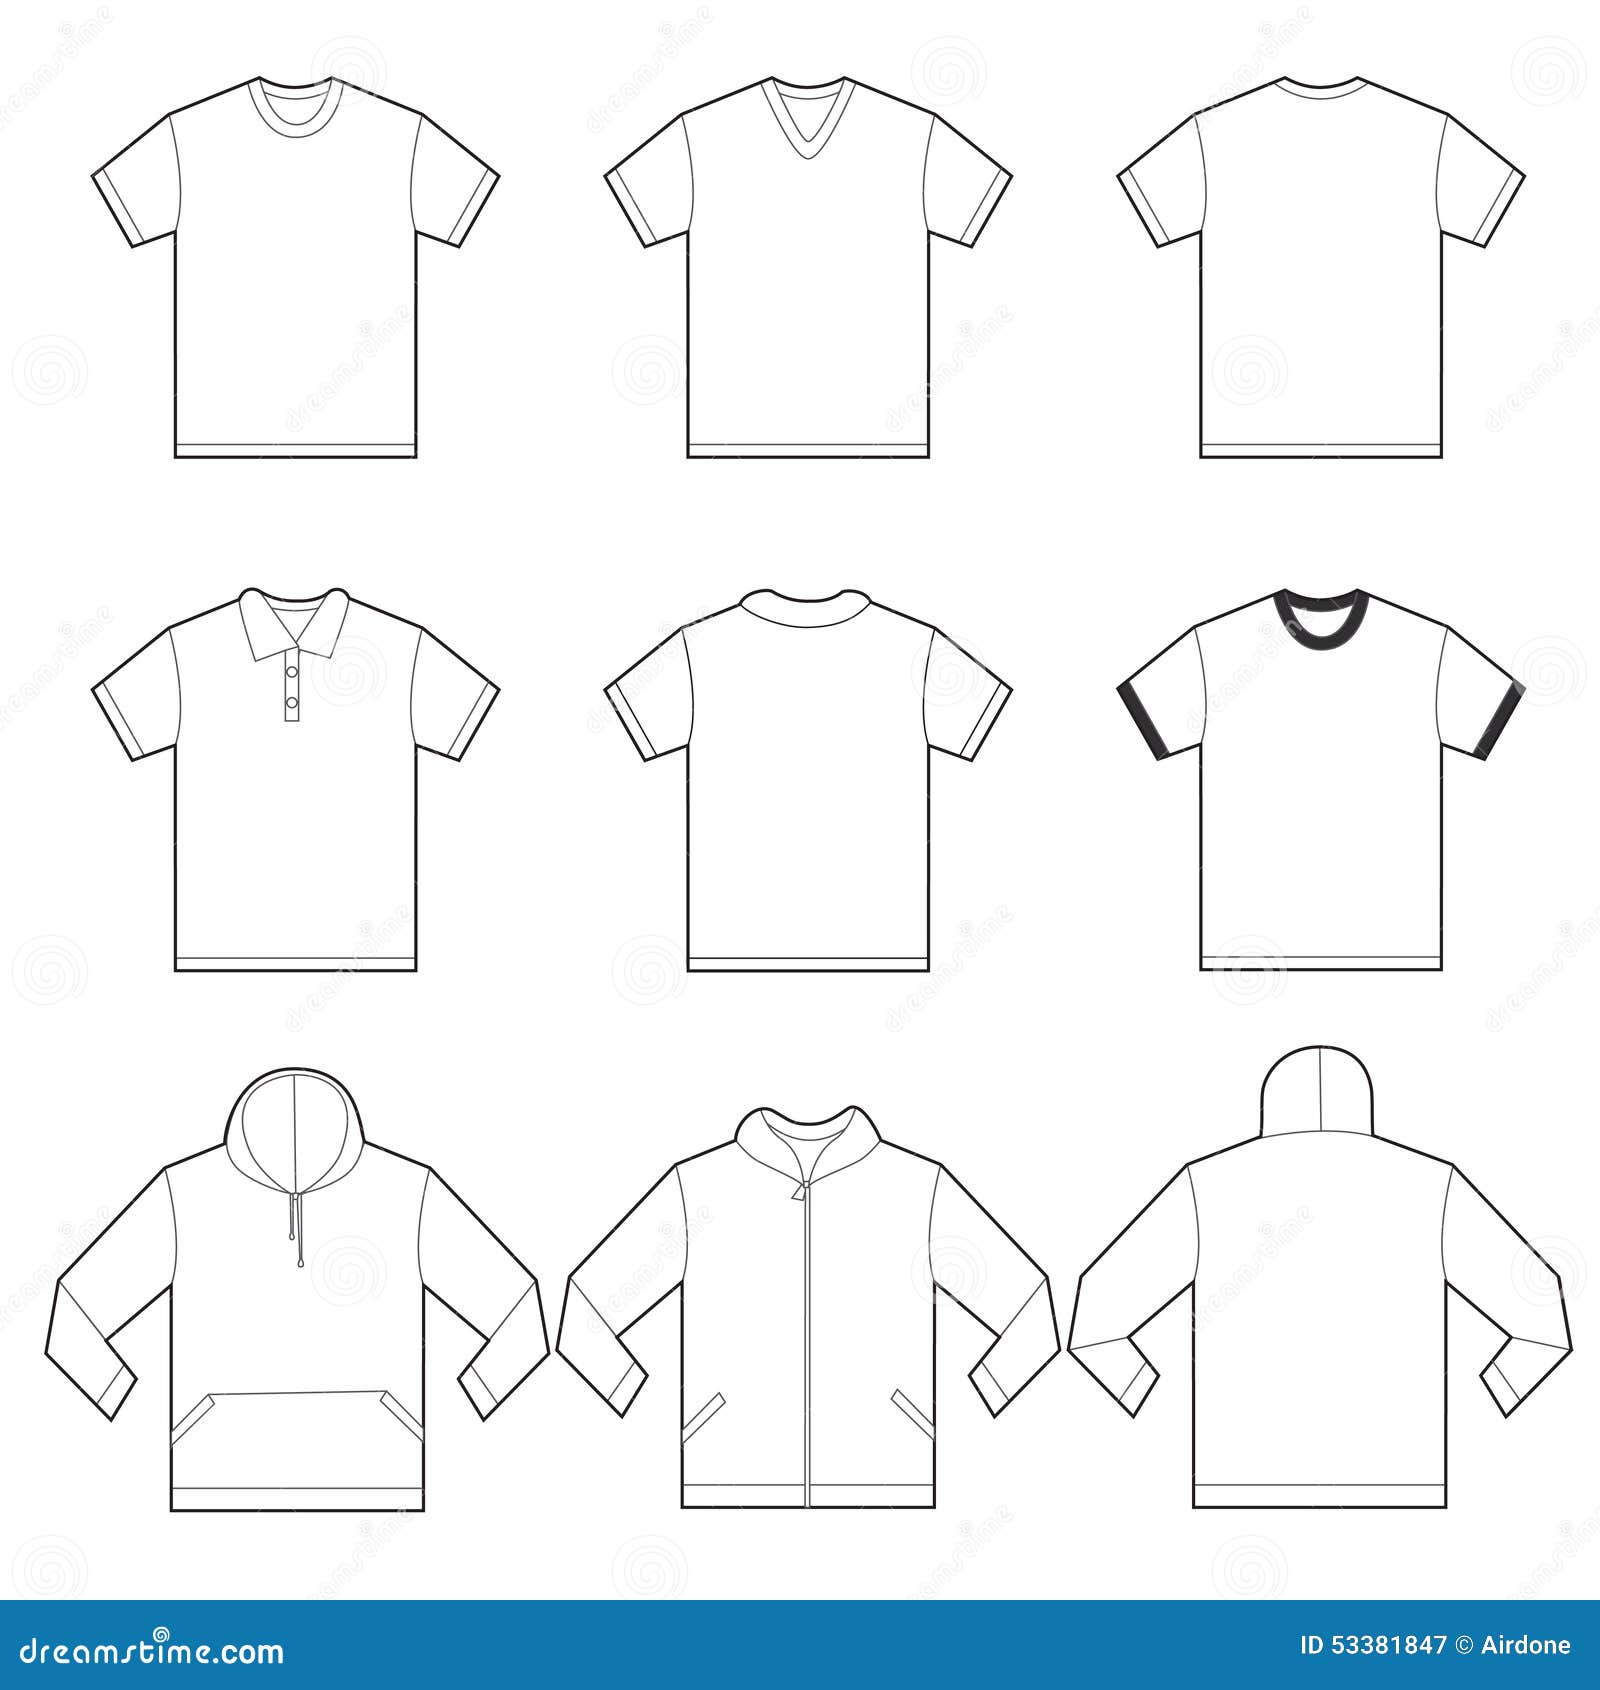 White Shirts Template stock vector. Illustration of jacket - 53381847